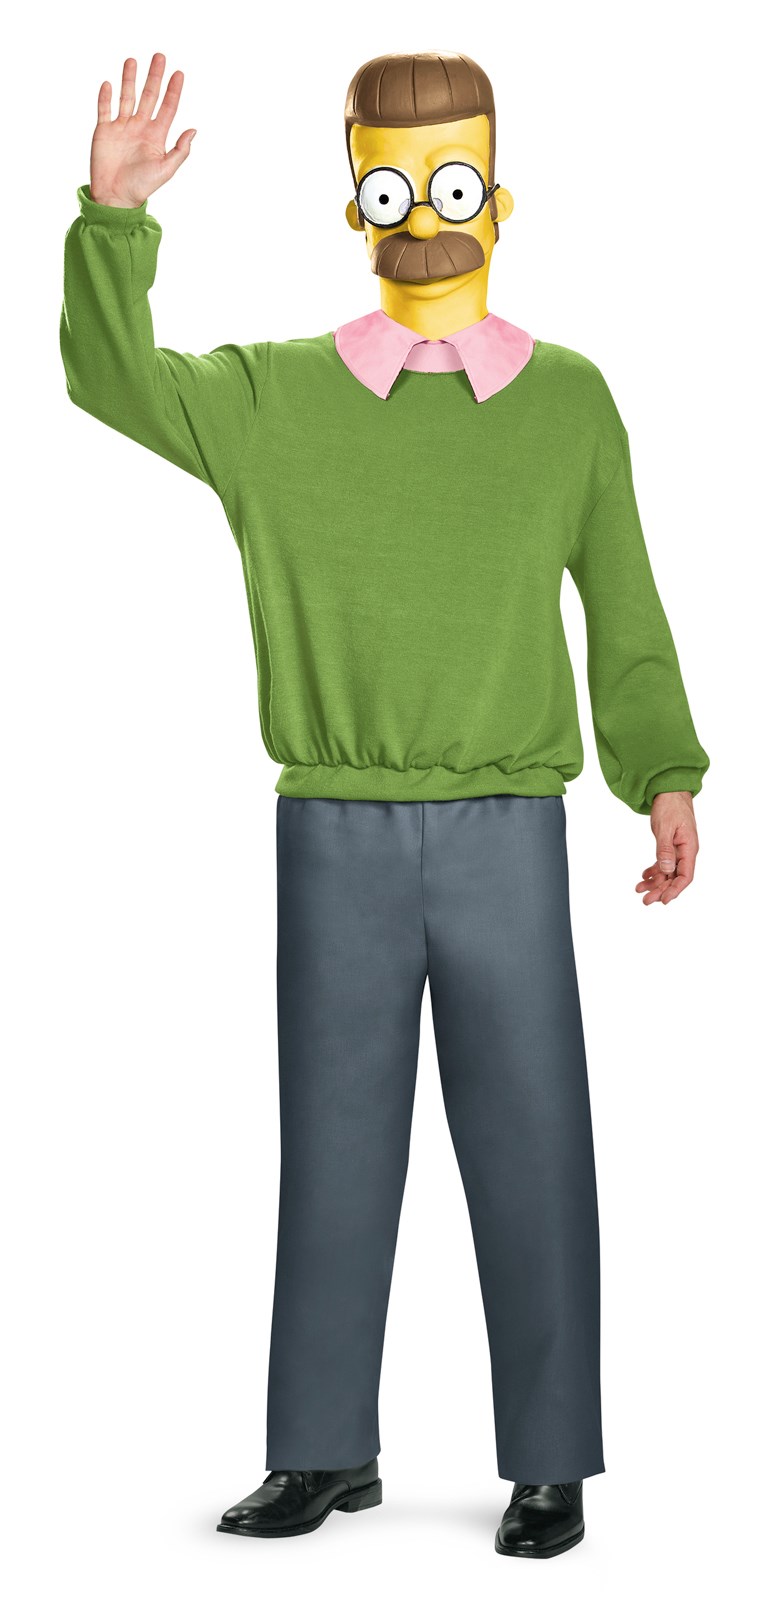 The Simpsons: Deluxe Adult Ned Flanders Costume